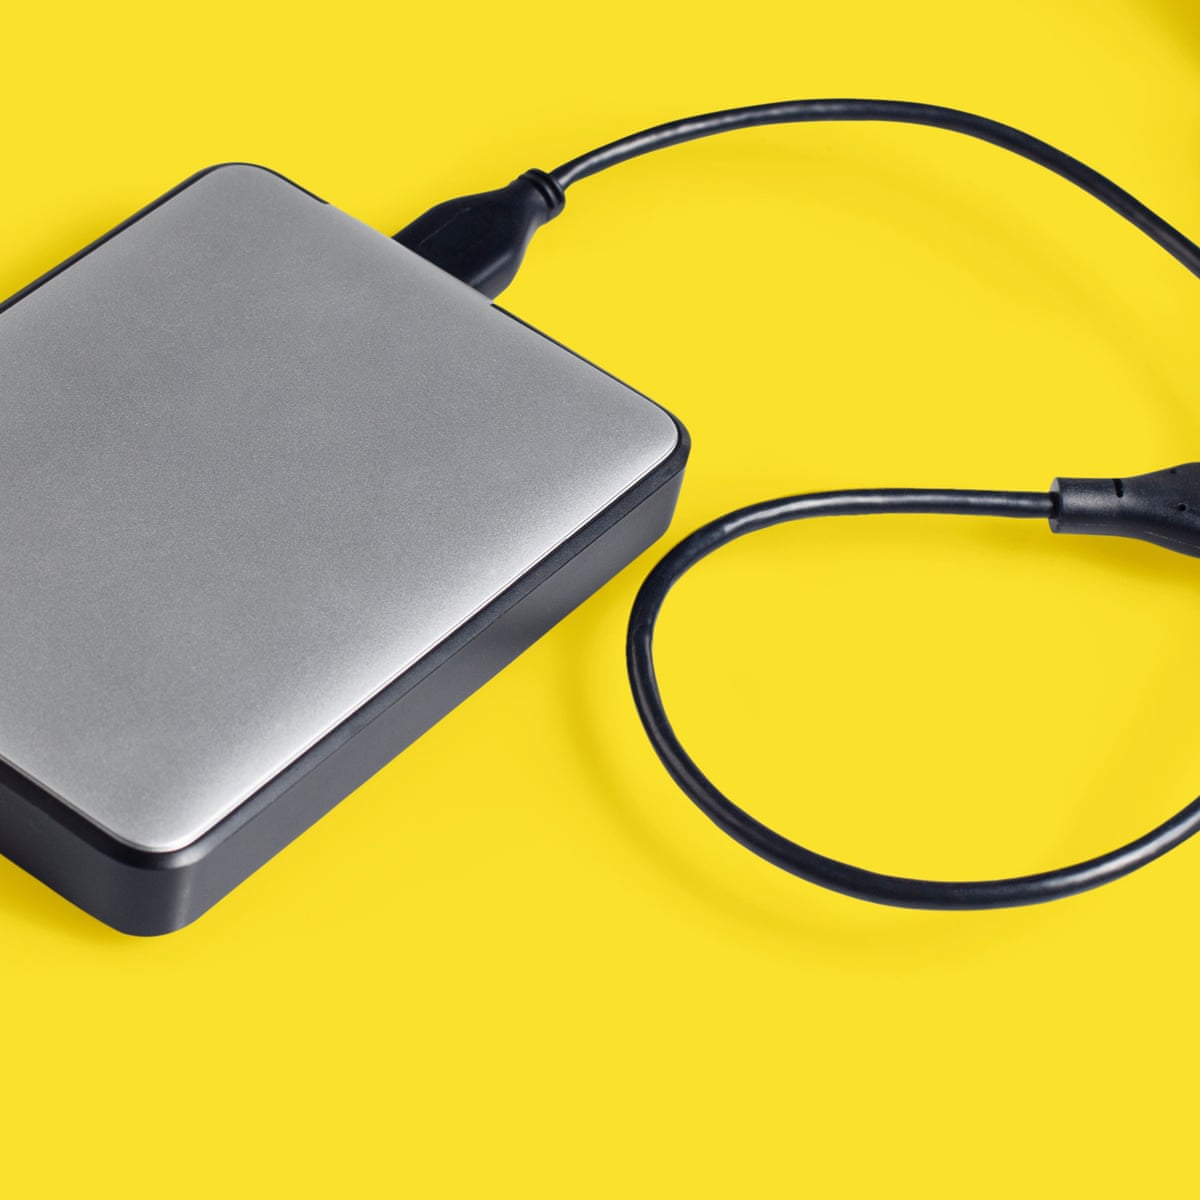 How to Windows 10 recognise an external hard drive | Computing | The Guardian